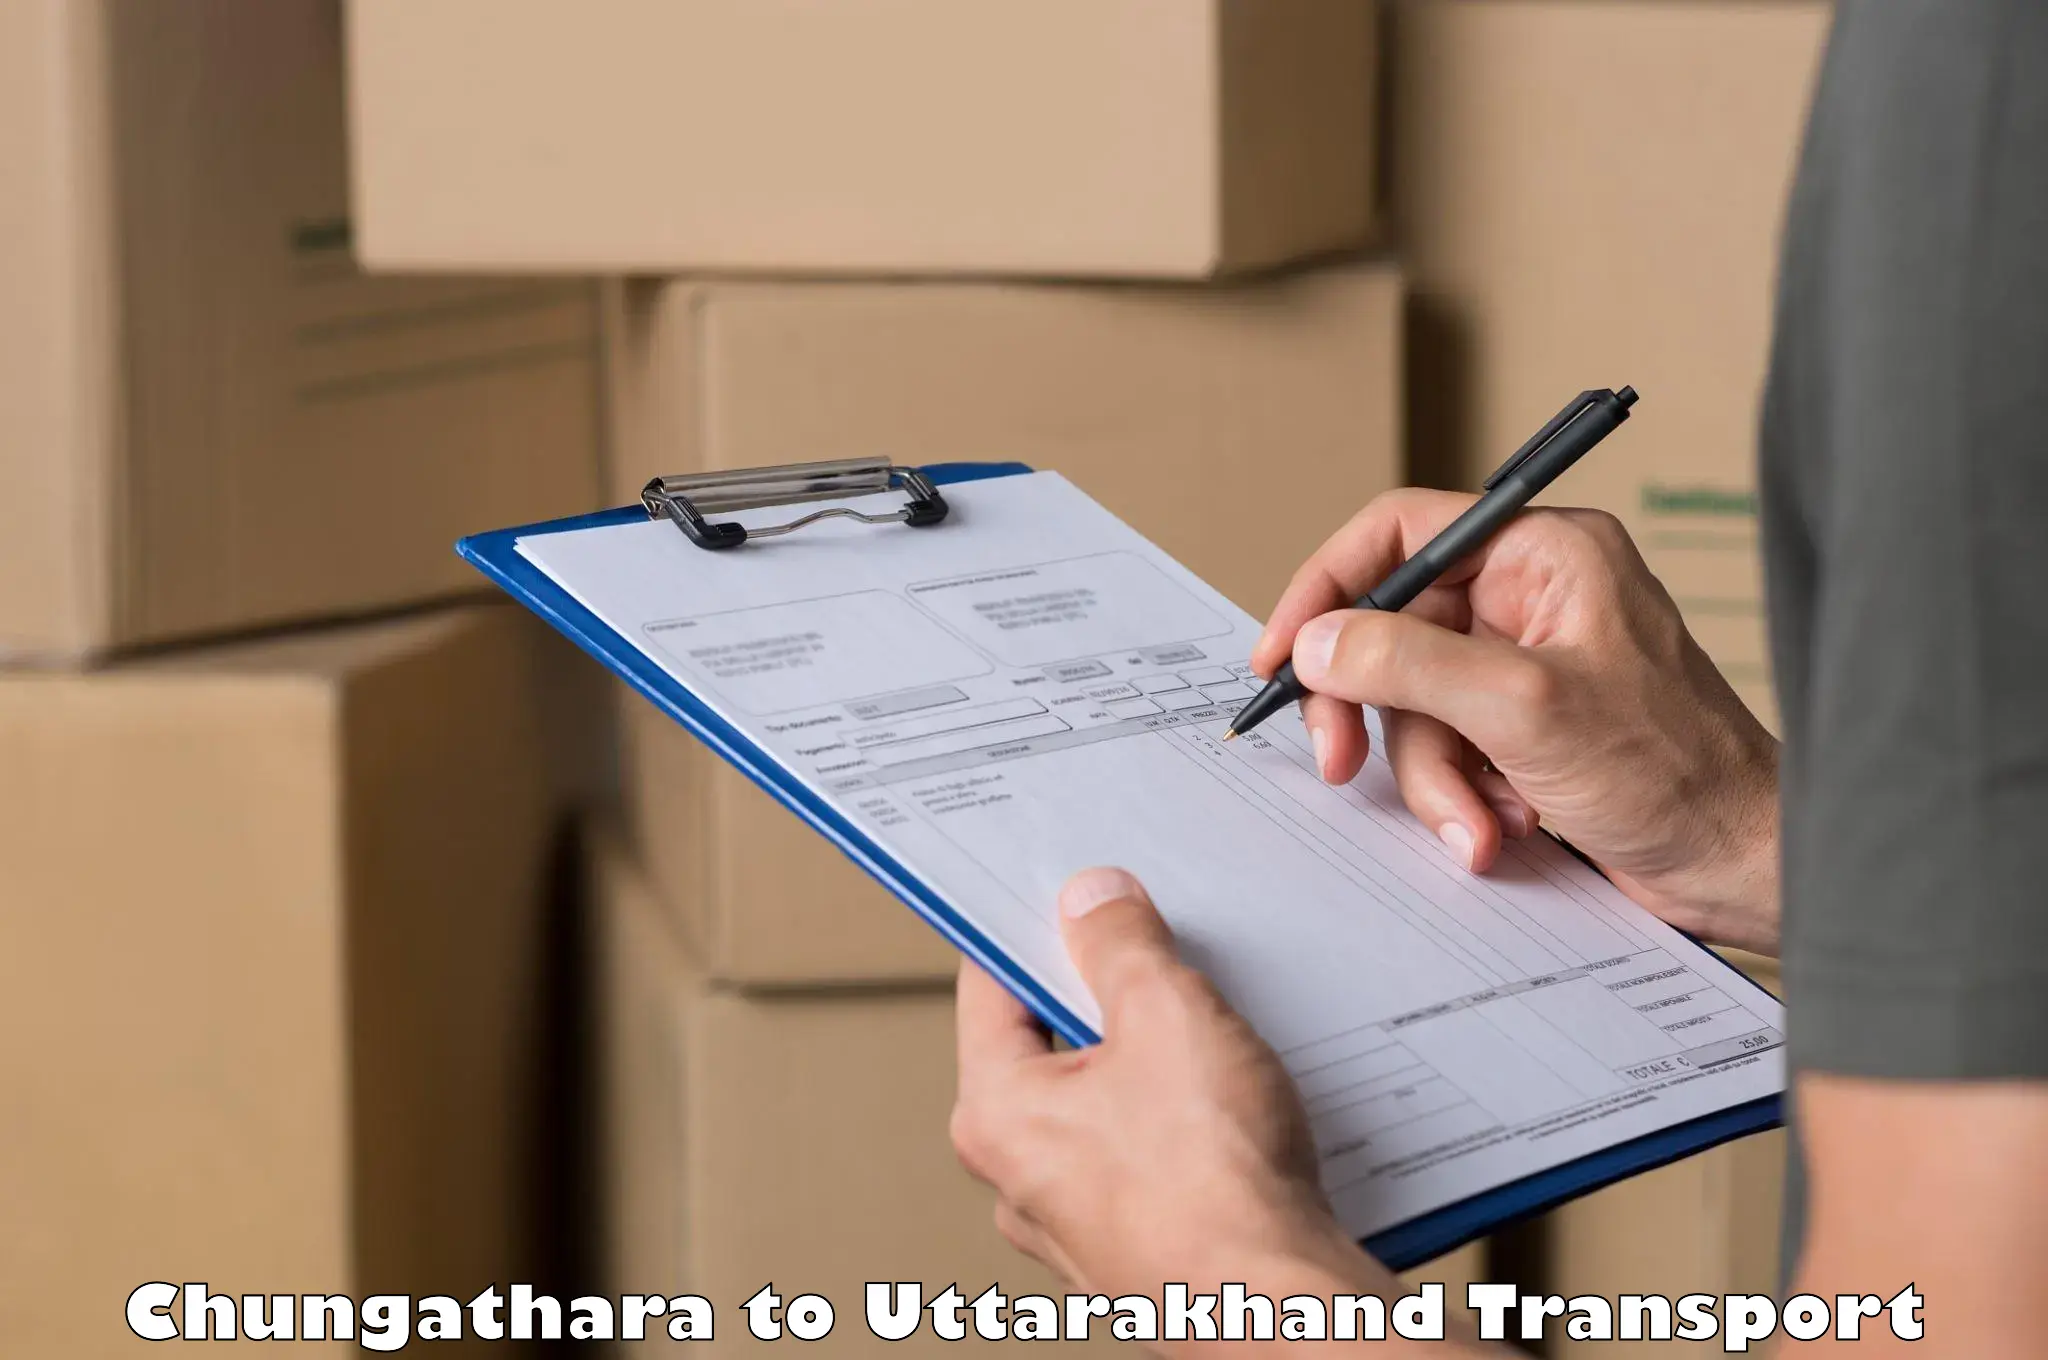 Domestic transport services Chungathara to IIT Roorkee